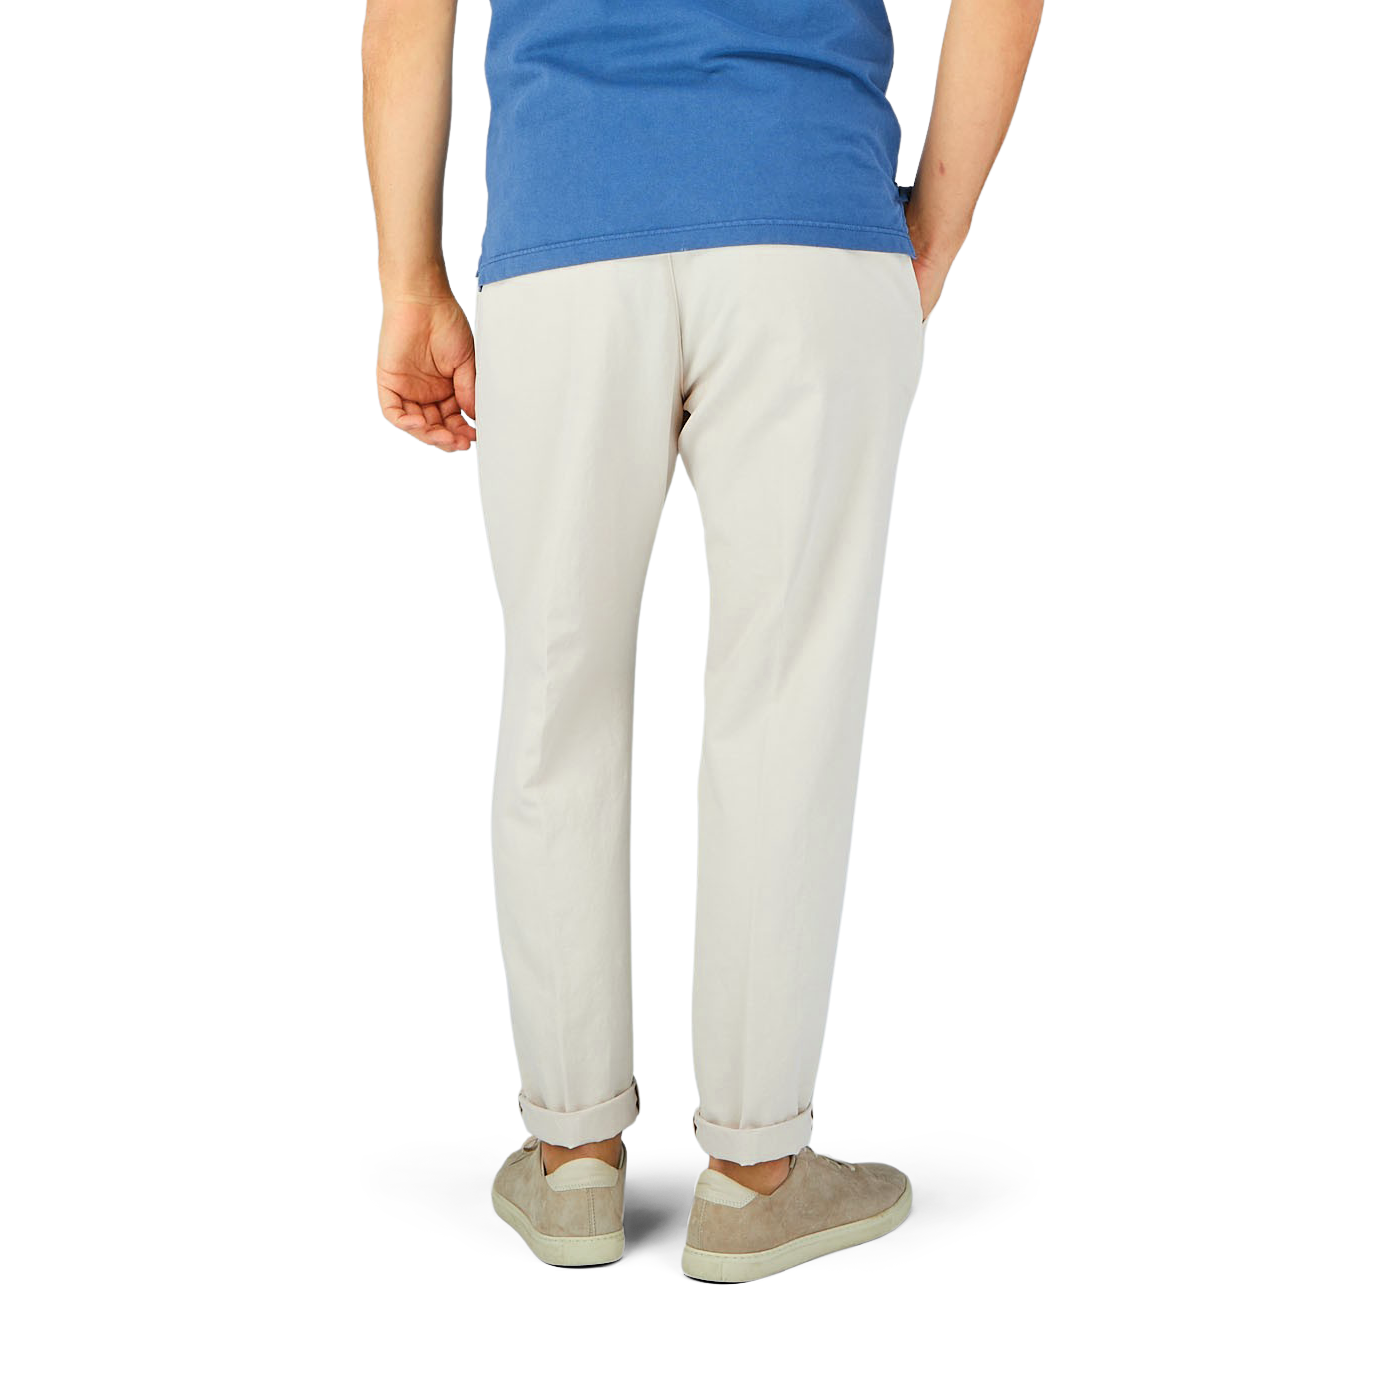 The man is wearing a blue cotton t-shirt and Briglia Ecru Beige Cotton Linen BG59 Pleated Chinos.